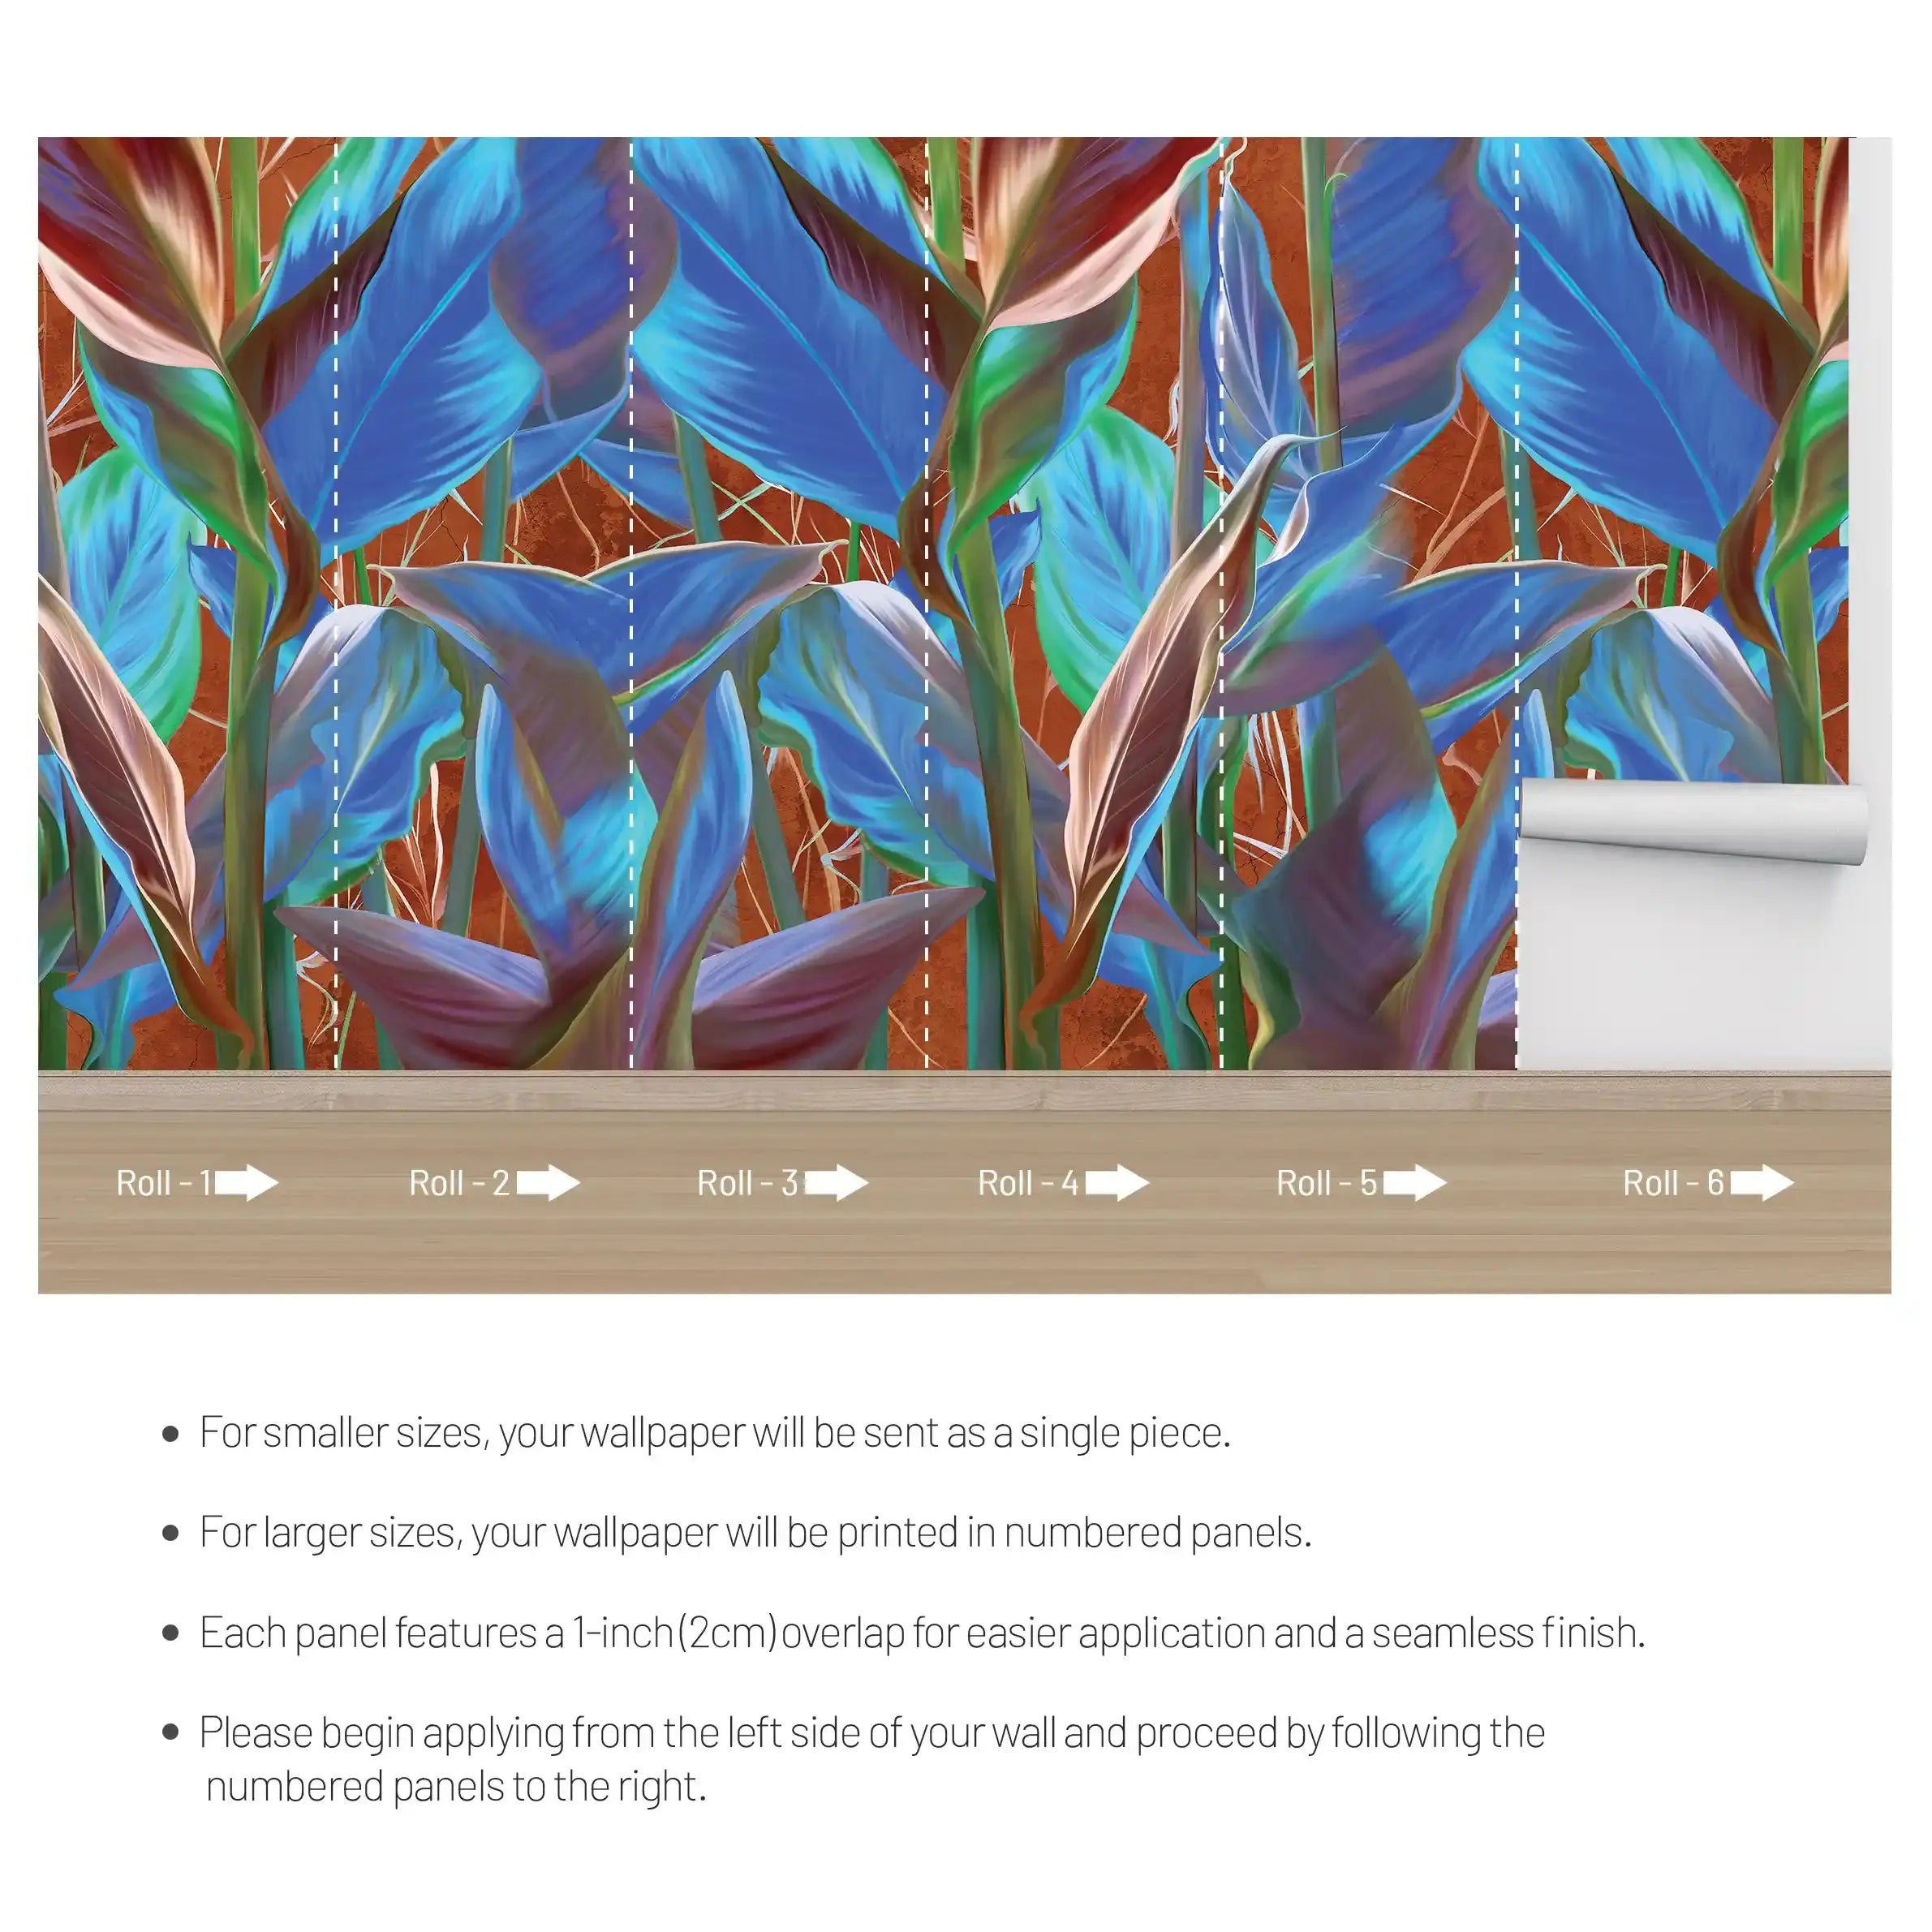 3007-B / Peel and Stick Wallpaper: Tropical Plant Design for Modern Home Decor, Easy to Install and Remove Wall Mural - Artevella